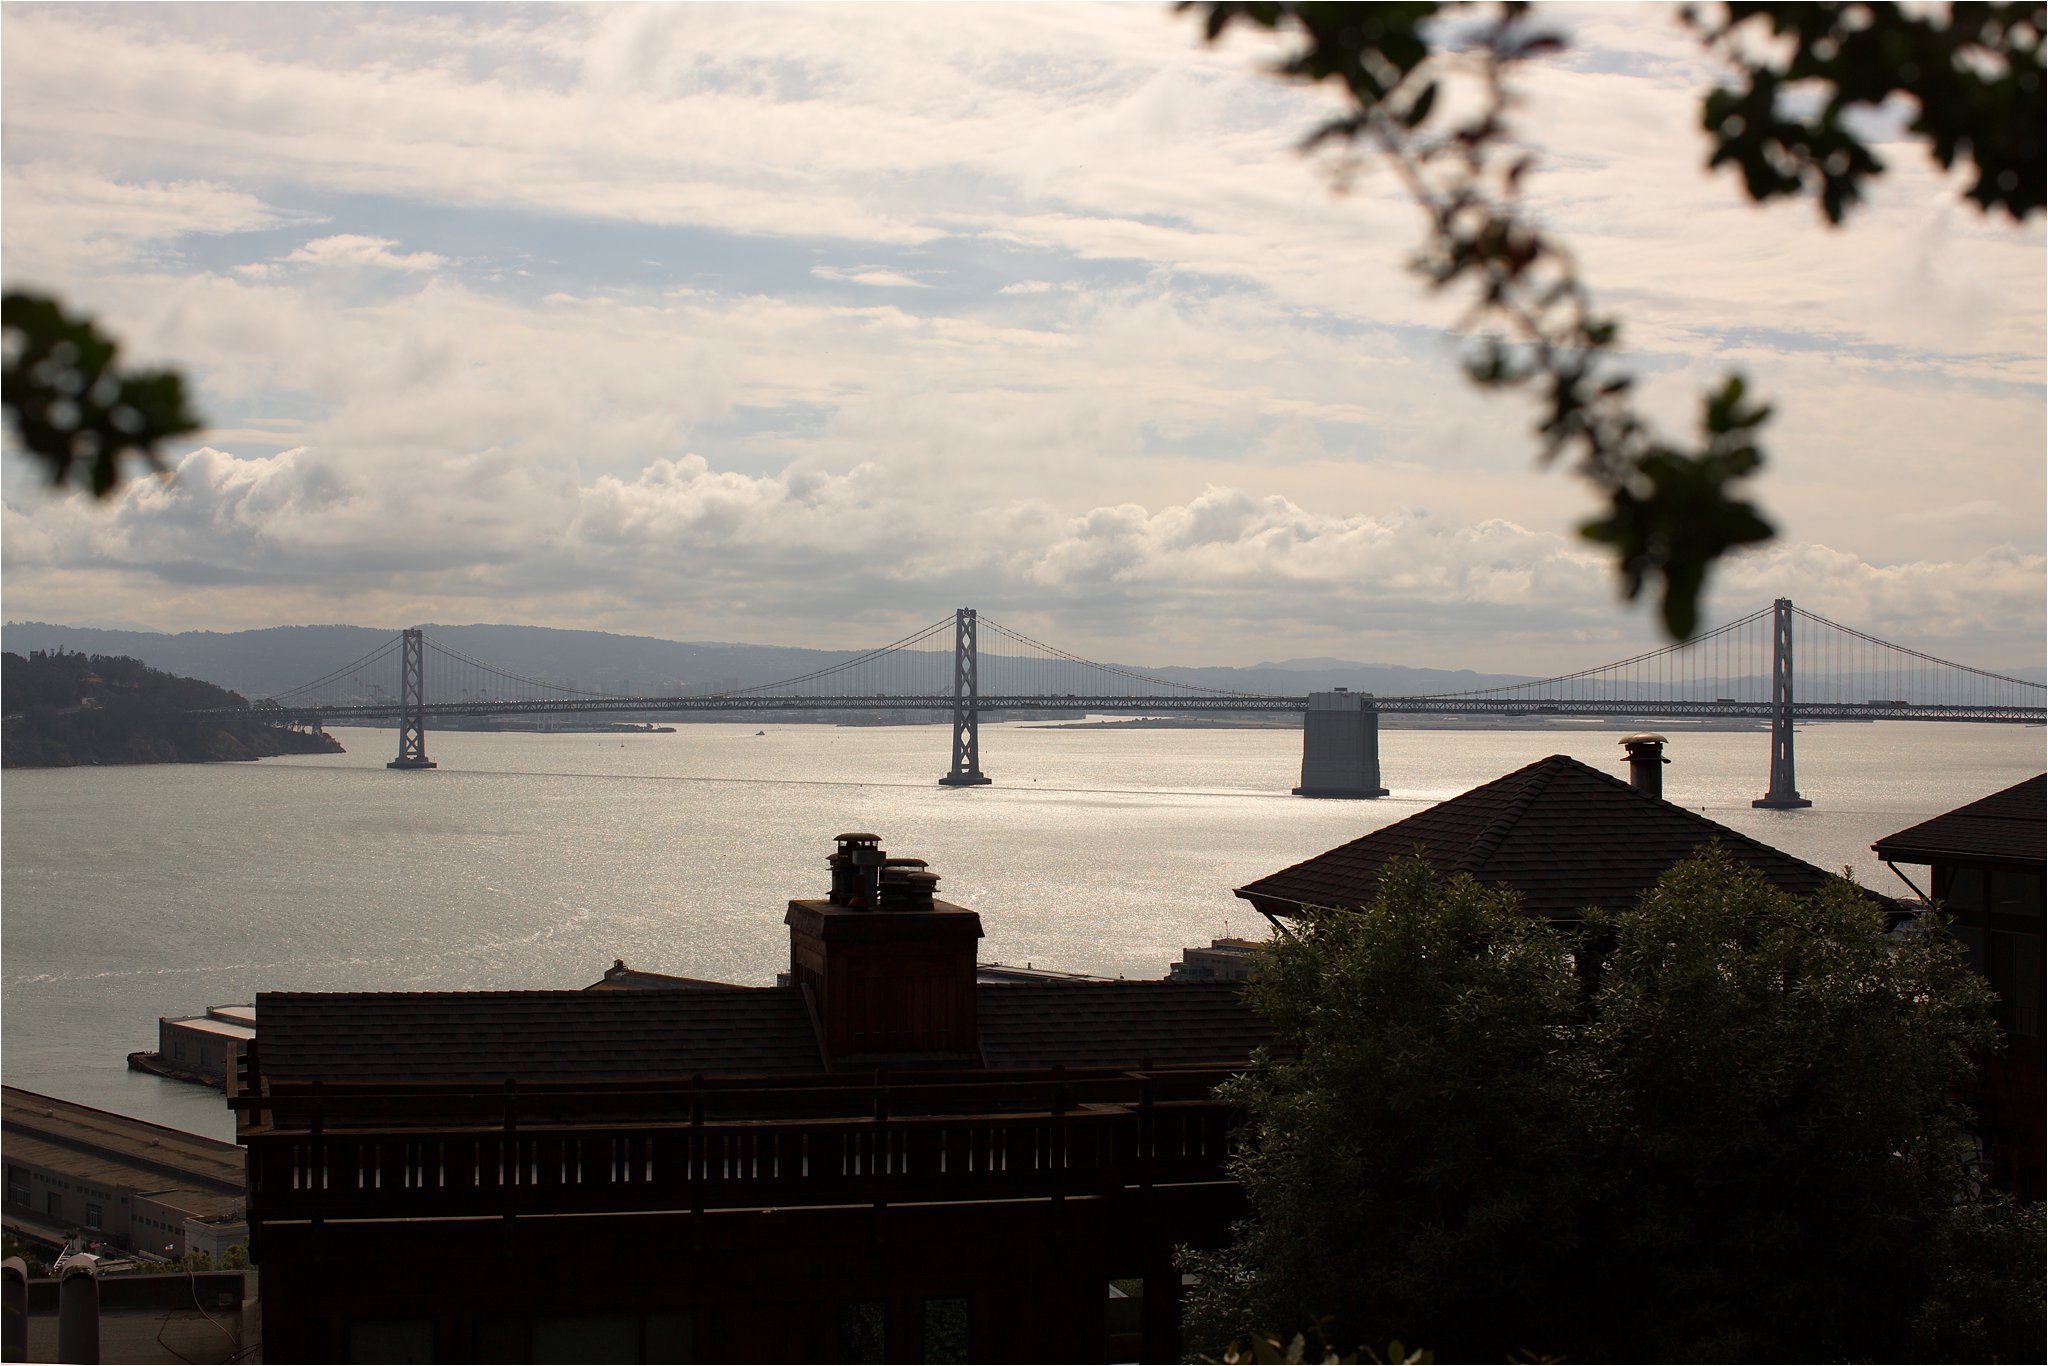 Sunset View of the San Francisco Bay Bridge from Telegraph Hill